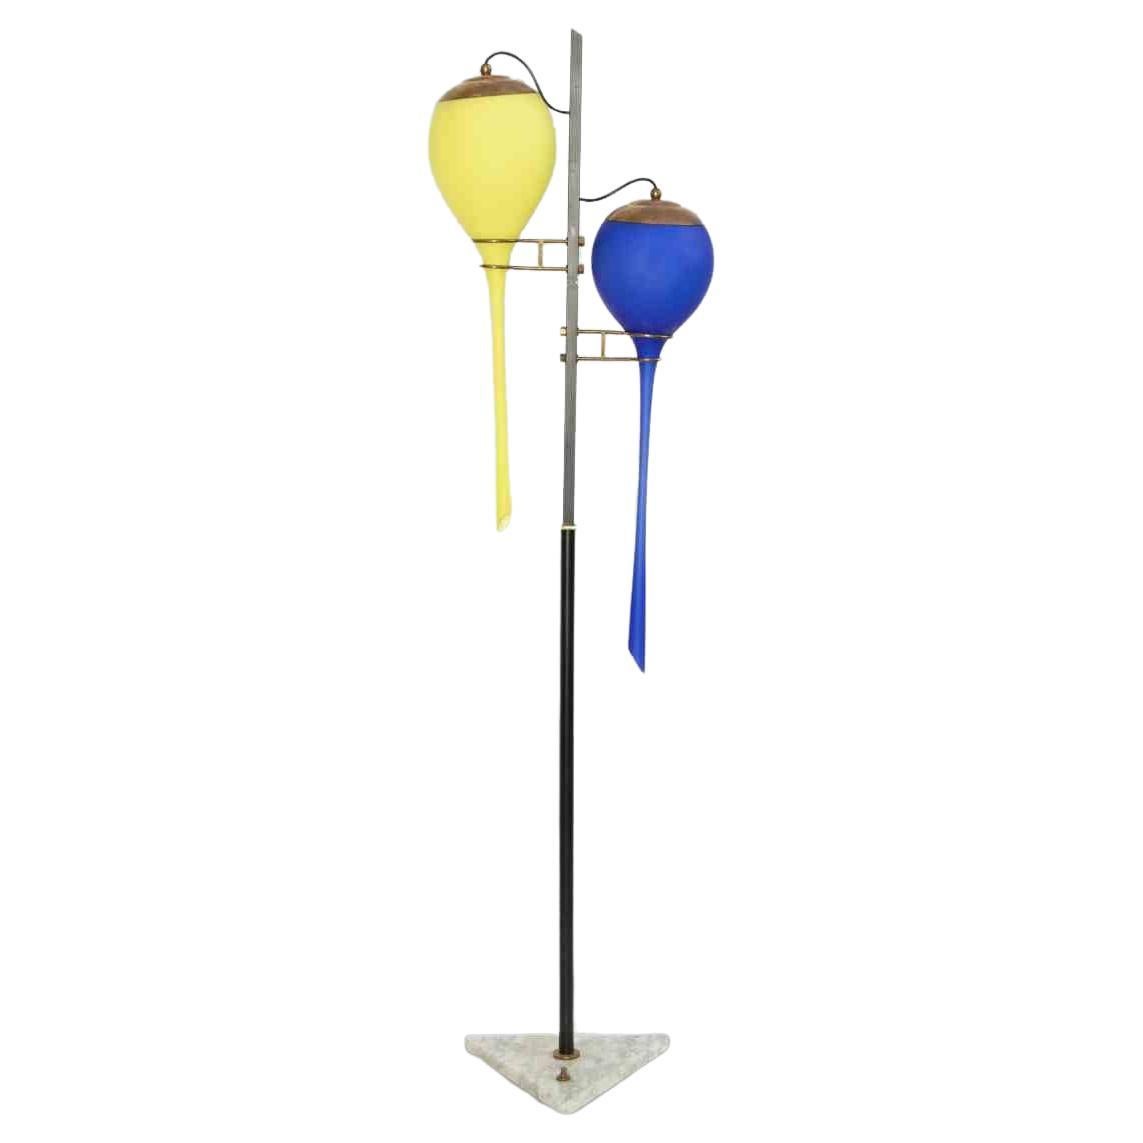 Yellow and Blue Stilnovo Lamp, Mid-20th Century For Sale